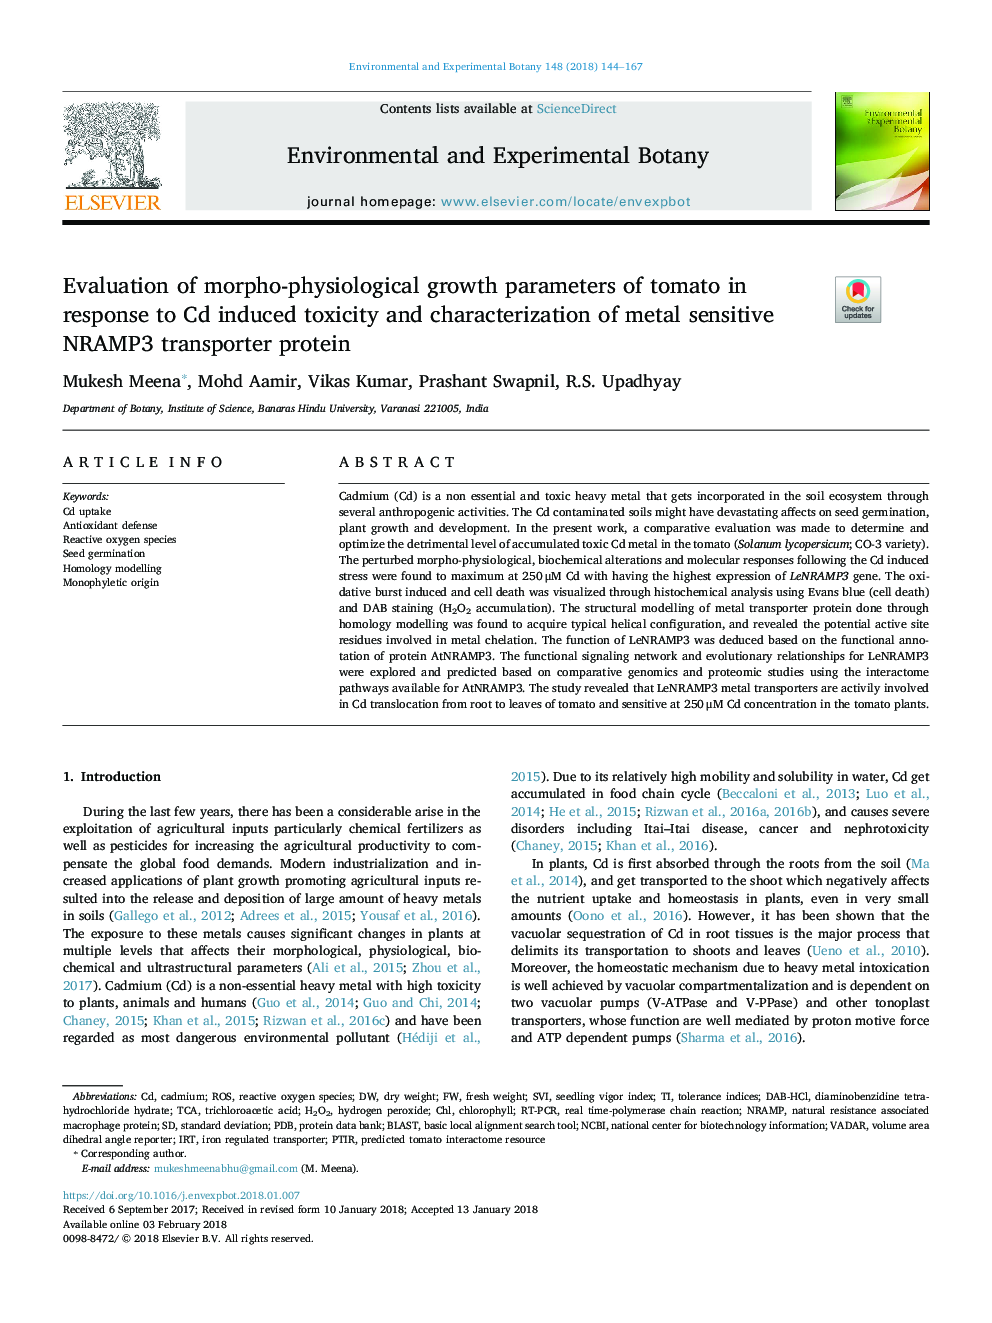 Evaluation of morpho-physiological growth parameters of tomato in response to Cd induced toxicity and characterization of metal sensitive NRAMP3 transporter protein